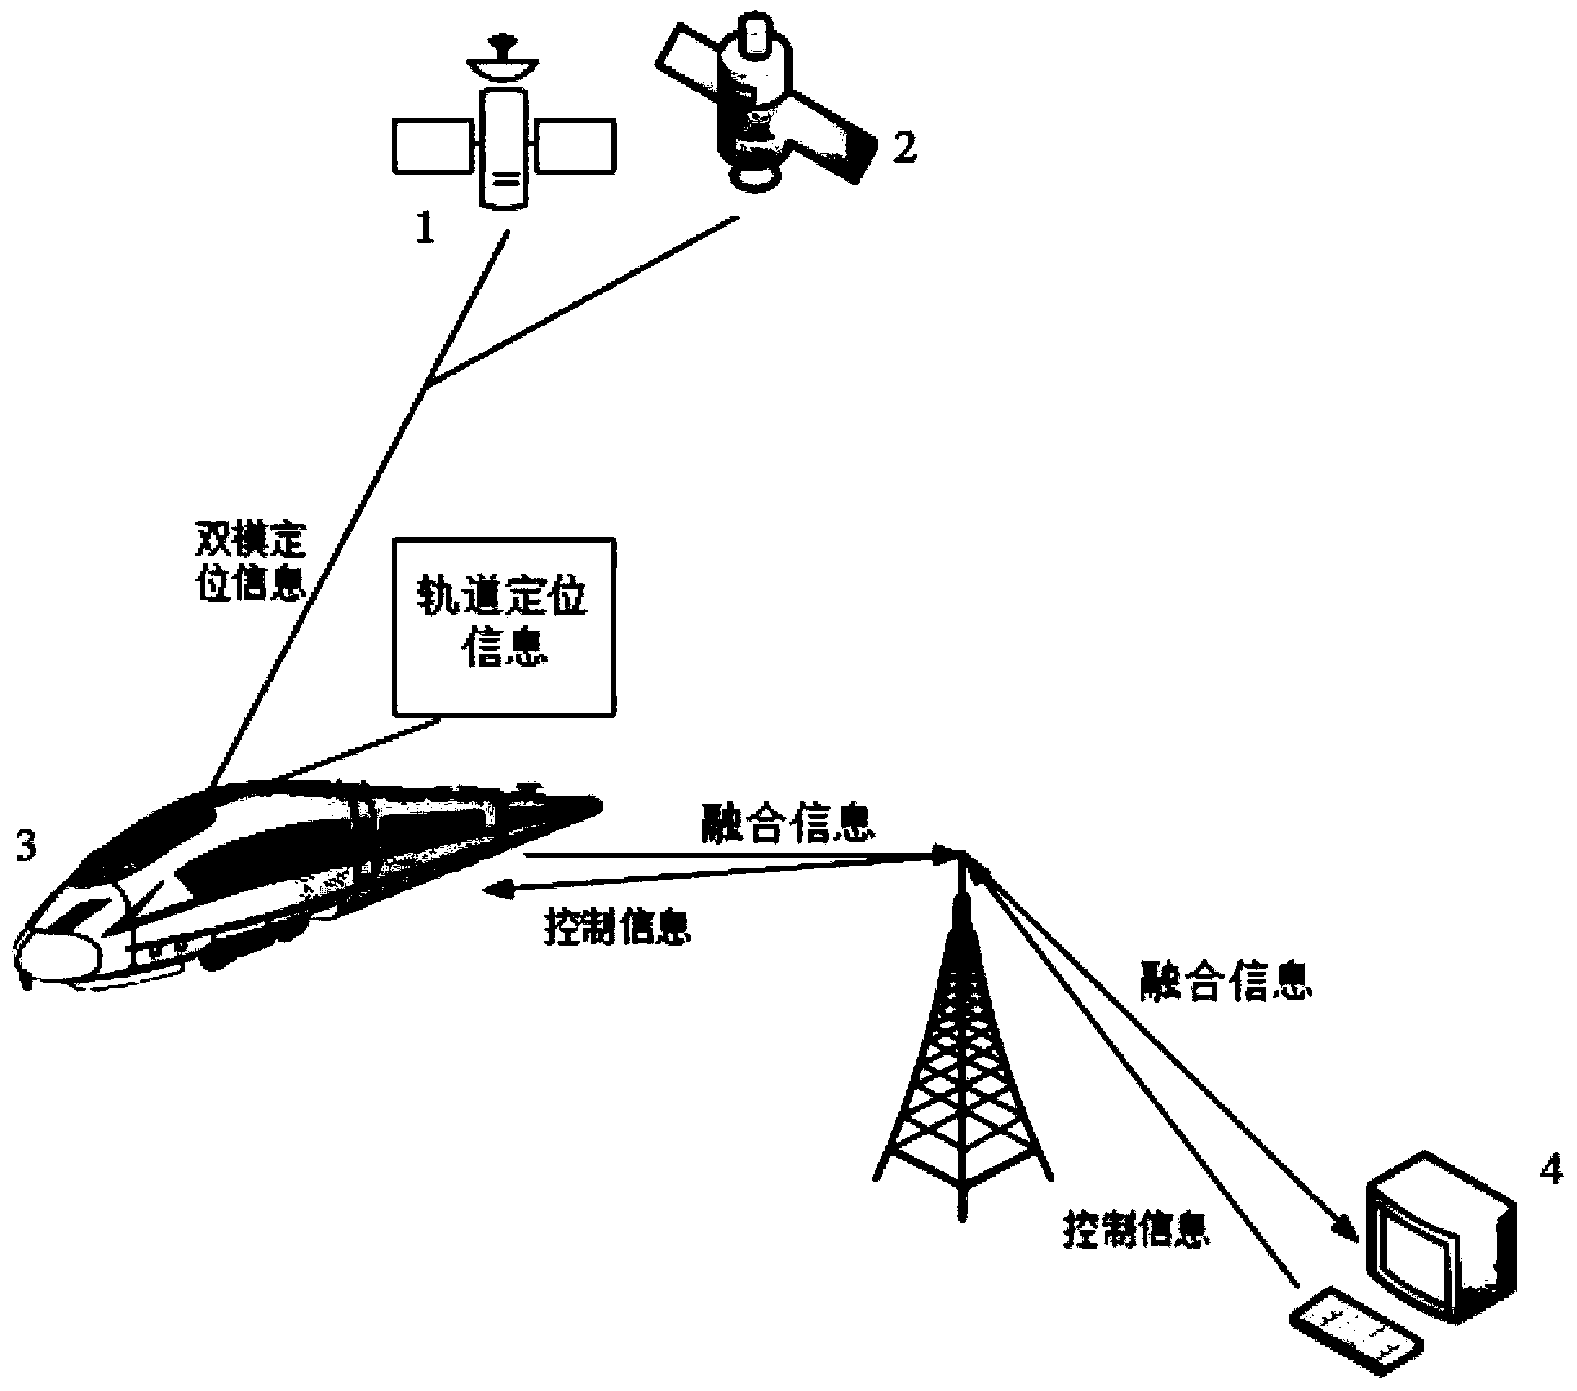 Auxiliary train protection system and method based on Beidou navigation